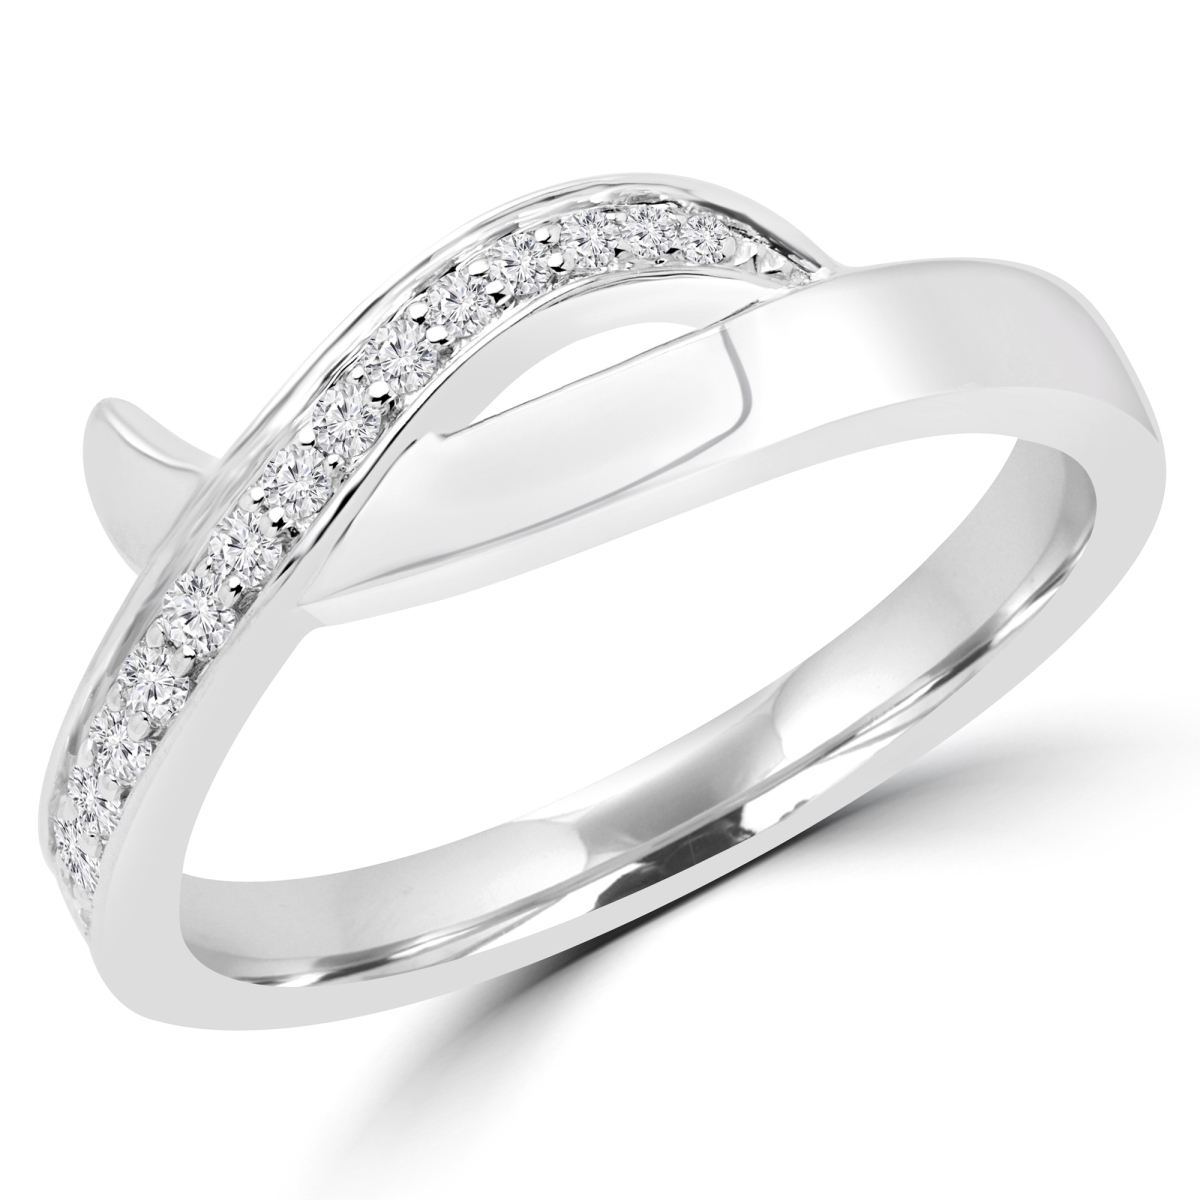 Picture of Majesty Diamonds MDR170054-3.5 0.16 CTW Round Diamond Cocktail Ring in 14K White Gold - 3.5